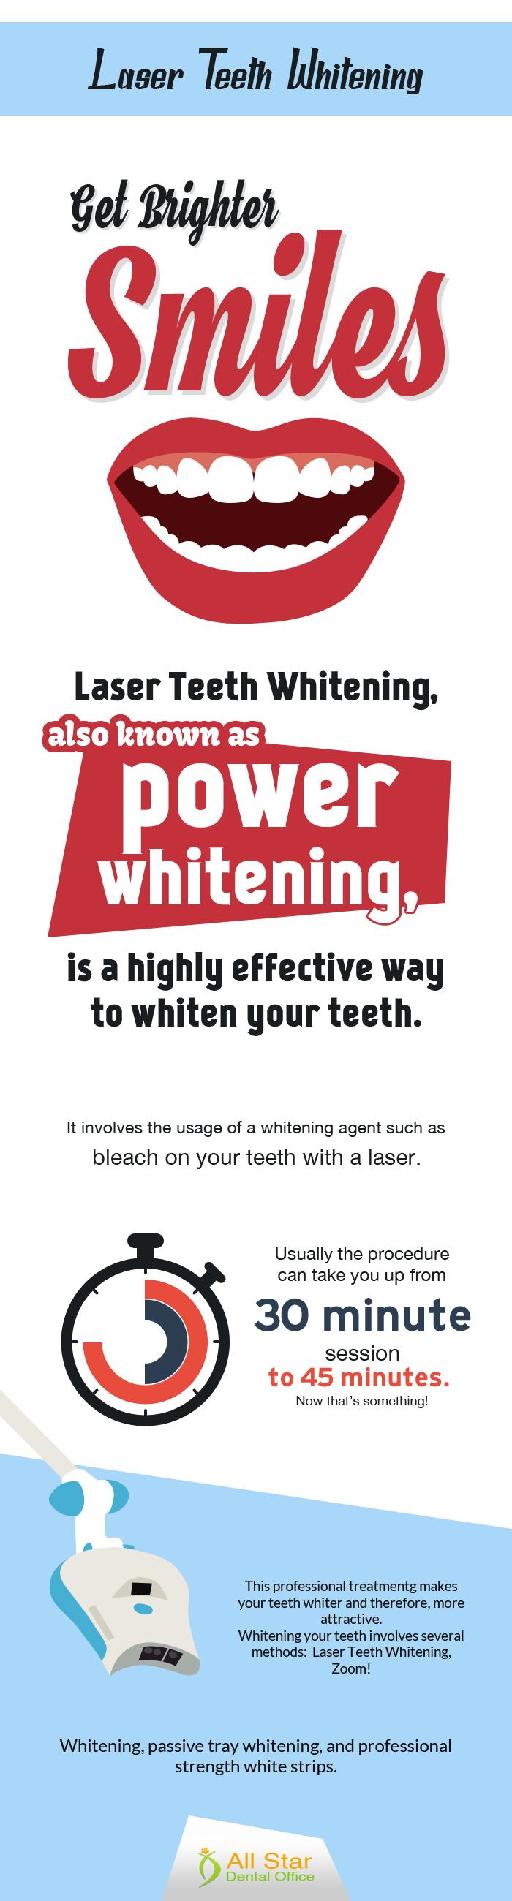 Laser Teeth Whitening - An Effective Way to Get Brighter Smile